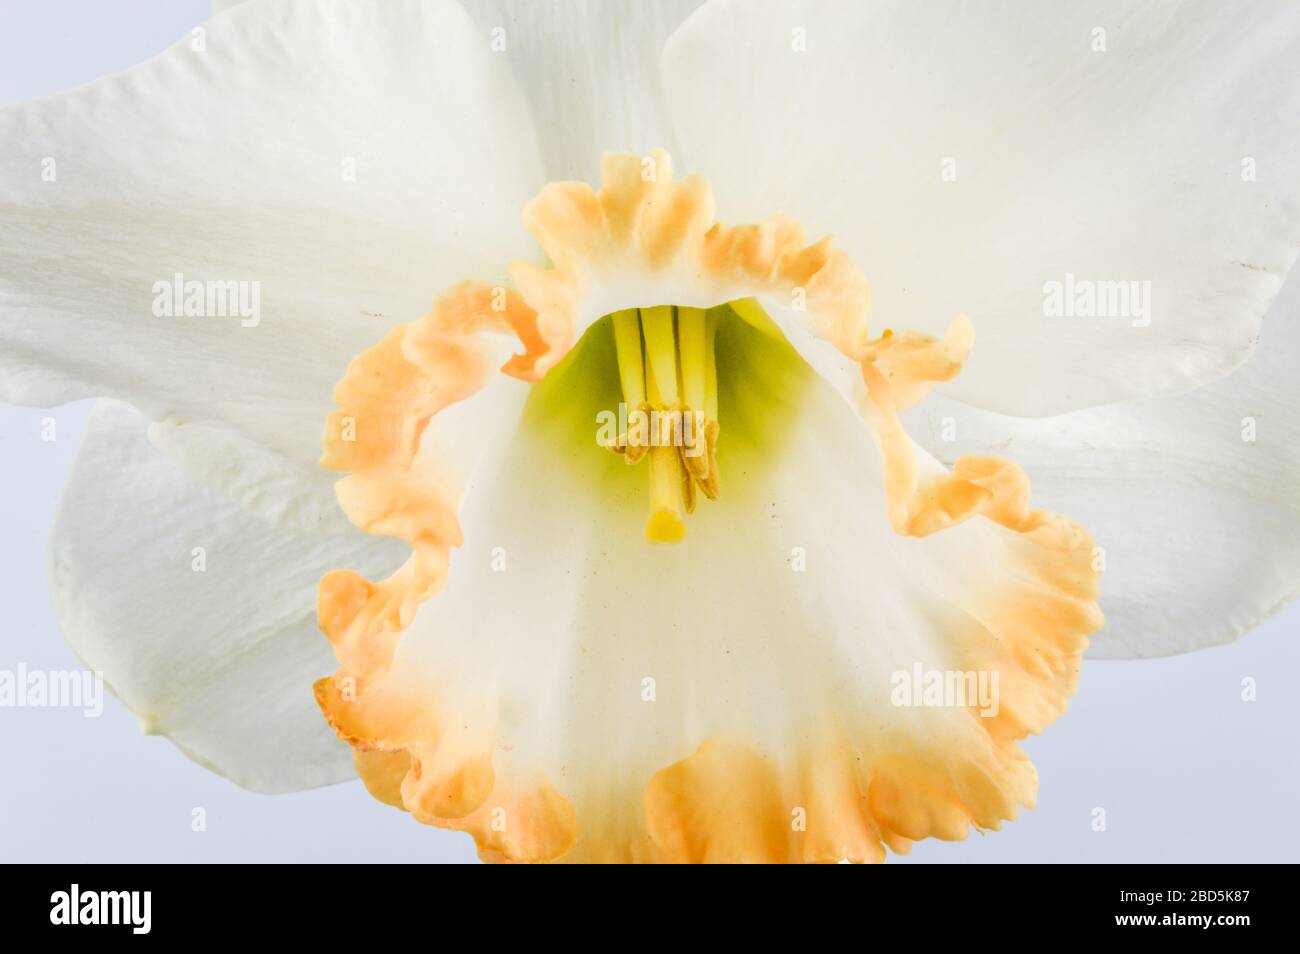 Close up of daffodil accent on grey background. Ivory white with a salmon cup. Accent was a major breakthrough in pink-cupped daffodils when it was in Stock Photo